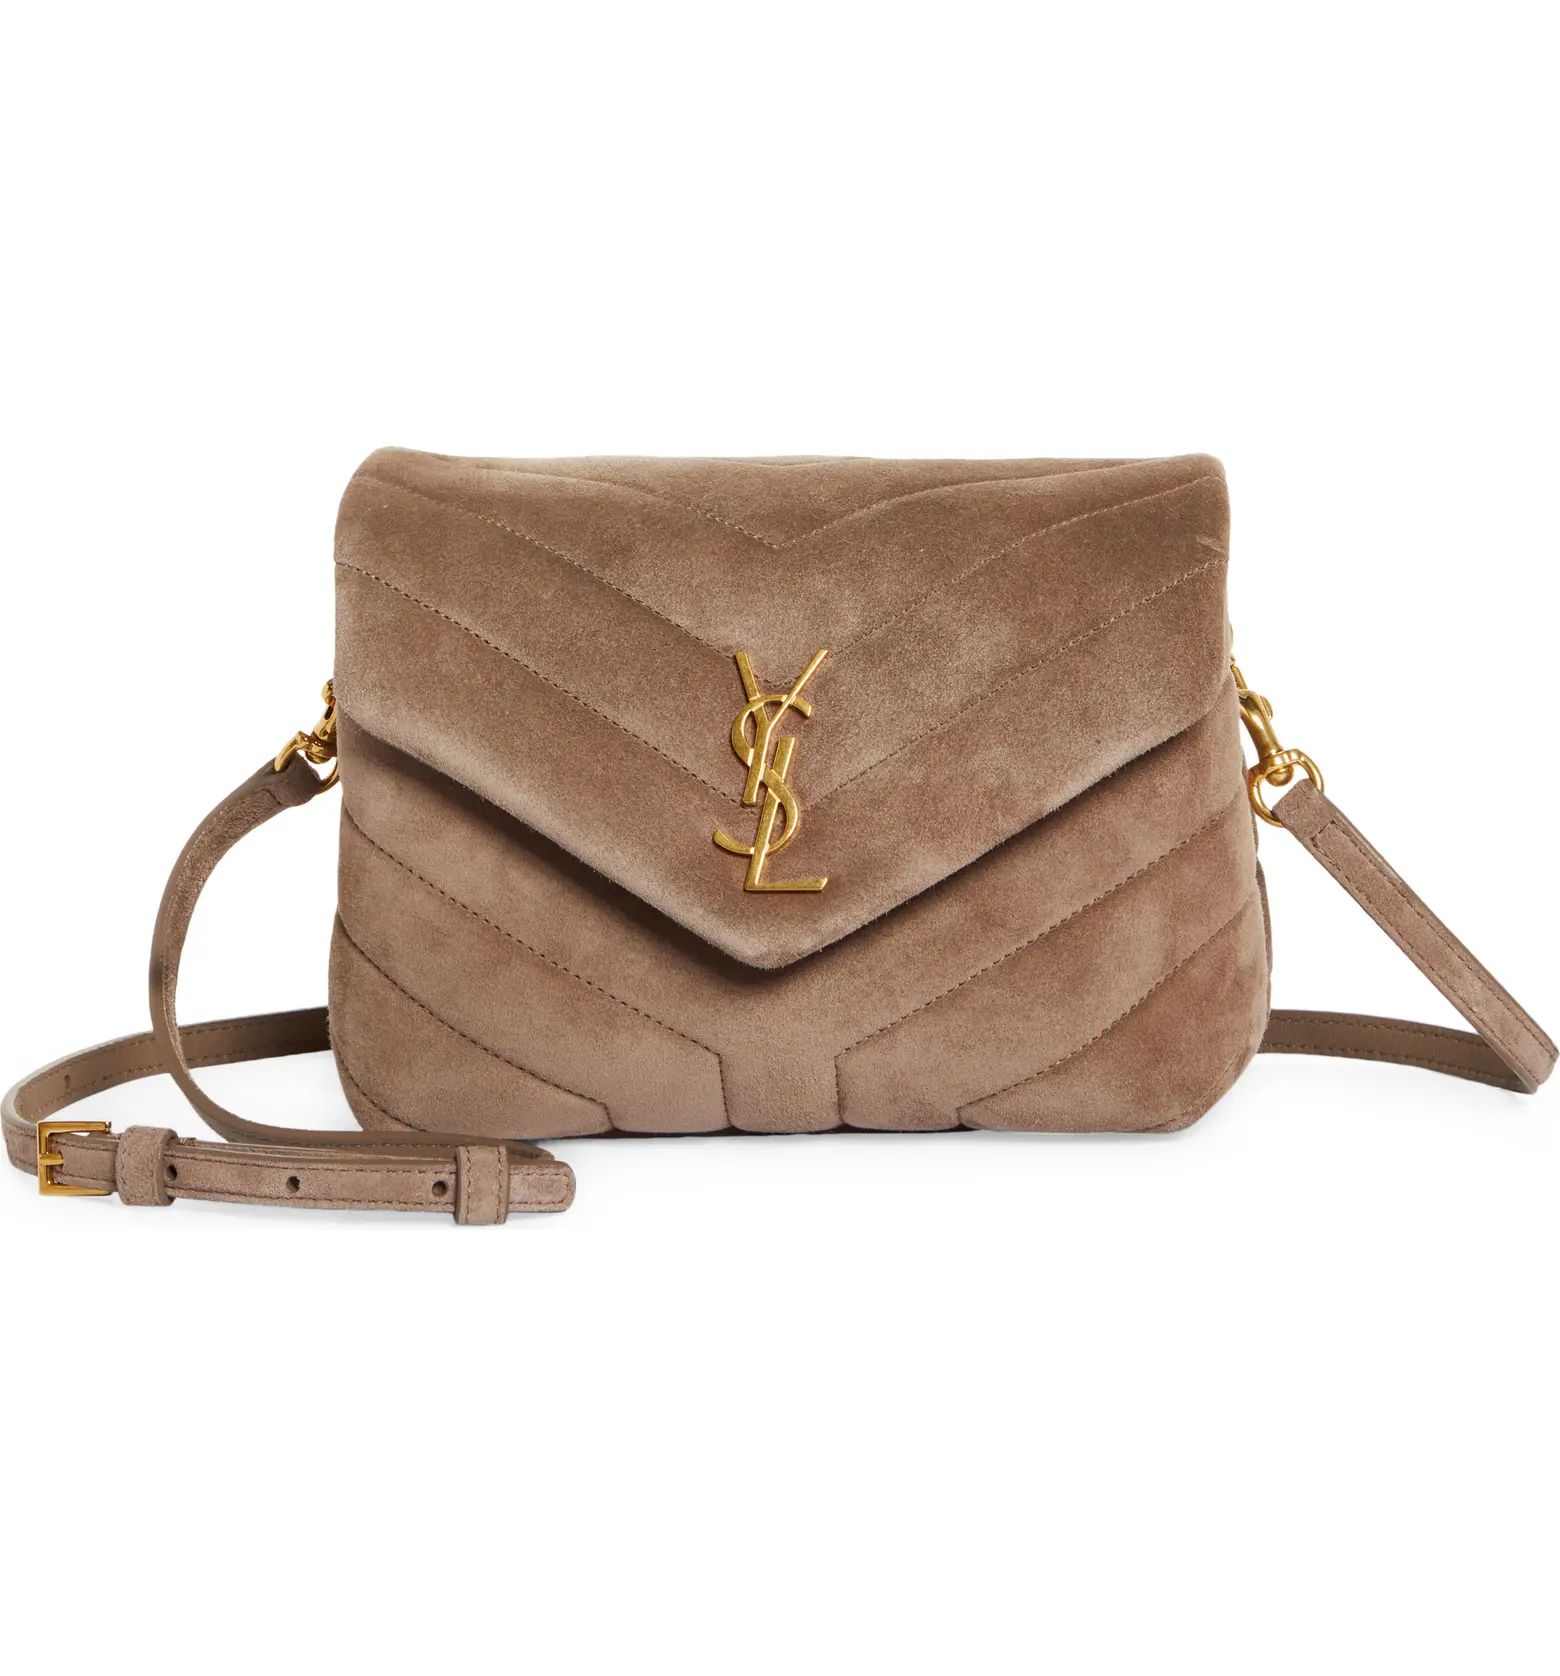 Toy Loulou Calfskin Suede Crossbody Bag | Nordstrom